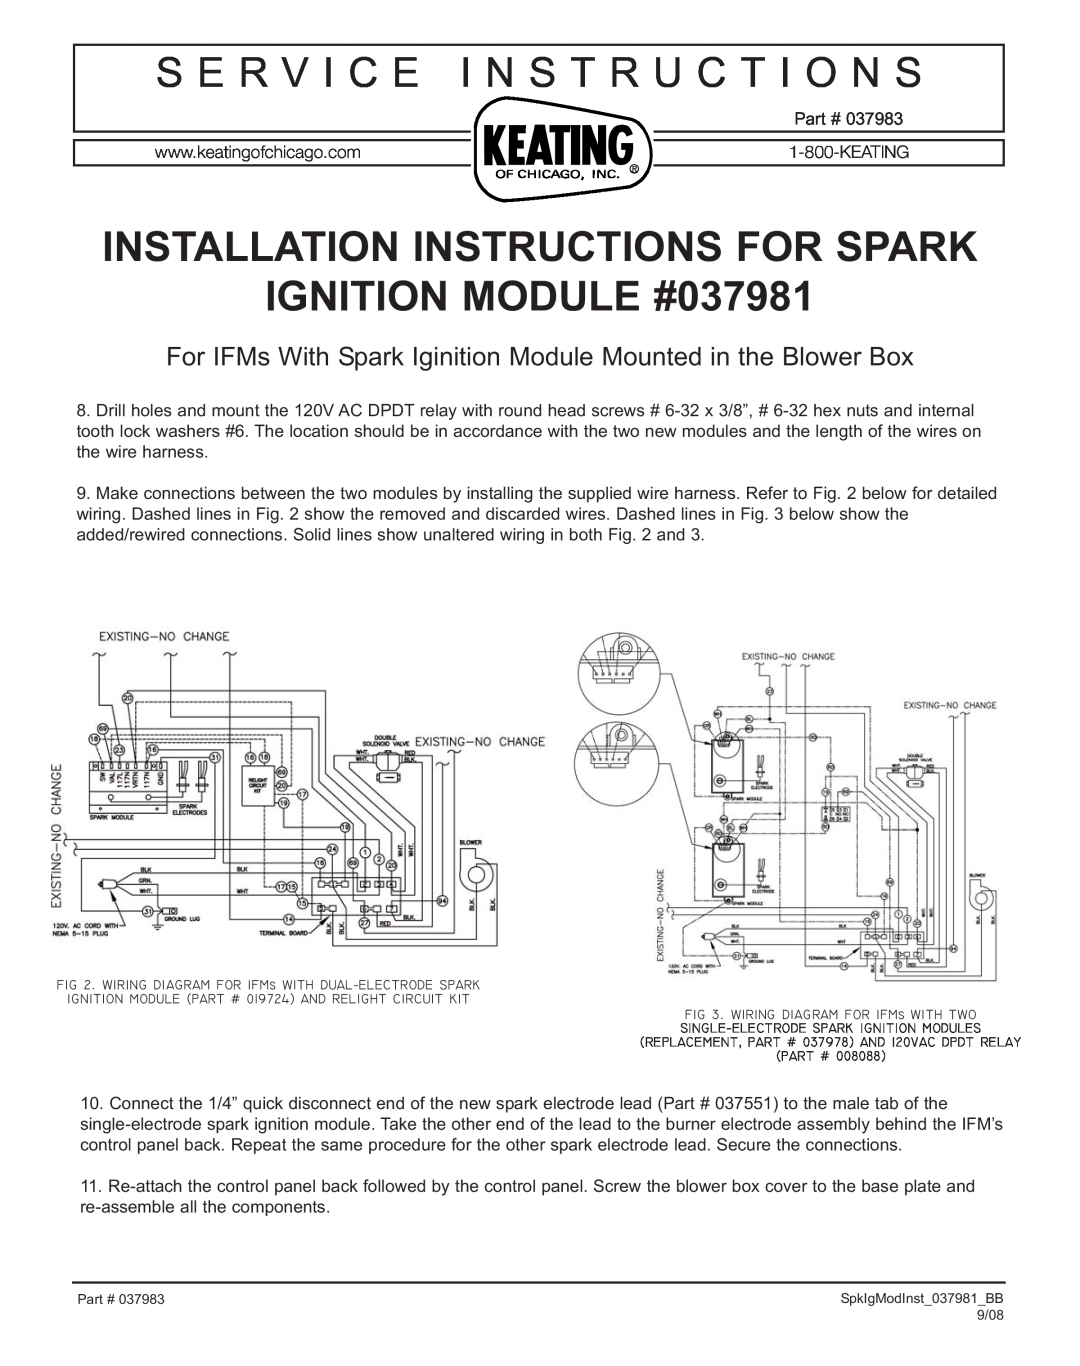 Keating Of Chicago 037981 S E R V I C E I N S T R U C T I O N S, Installation Instructions For Spark 